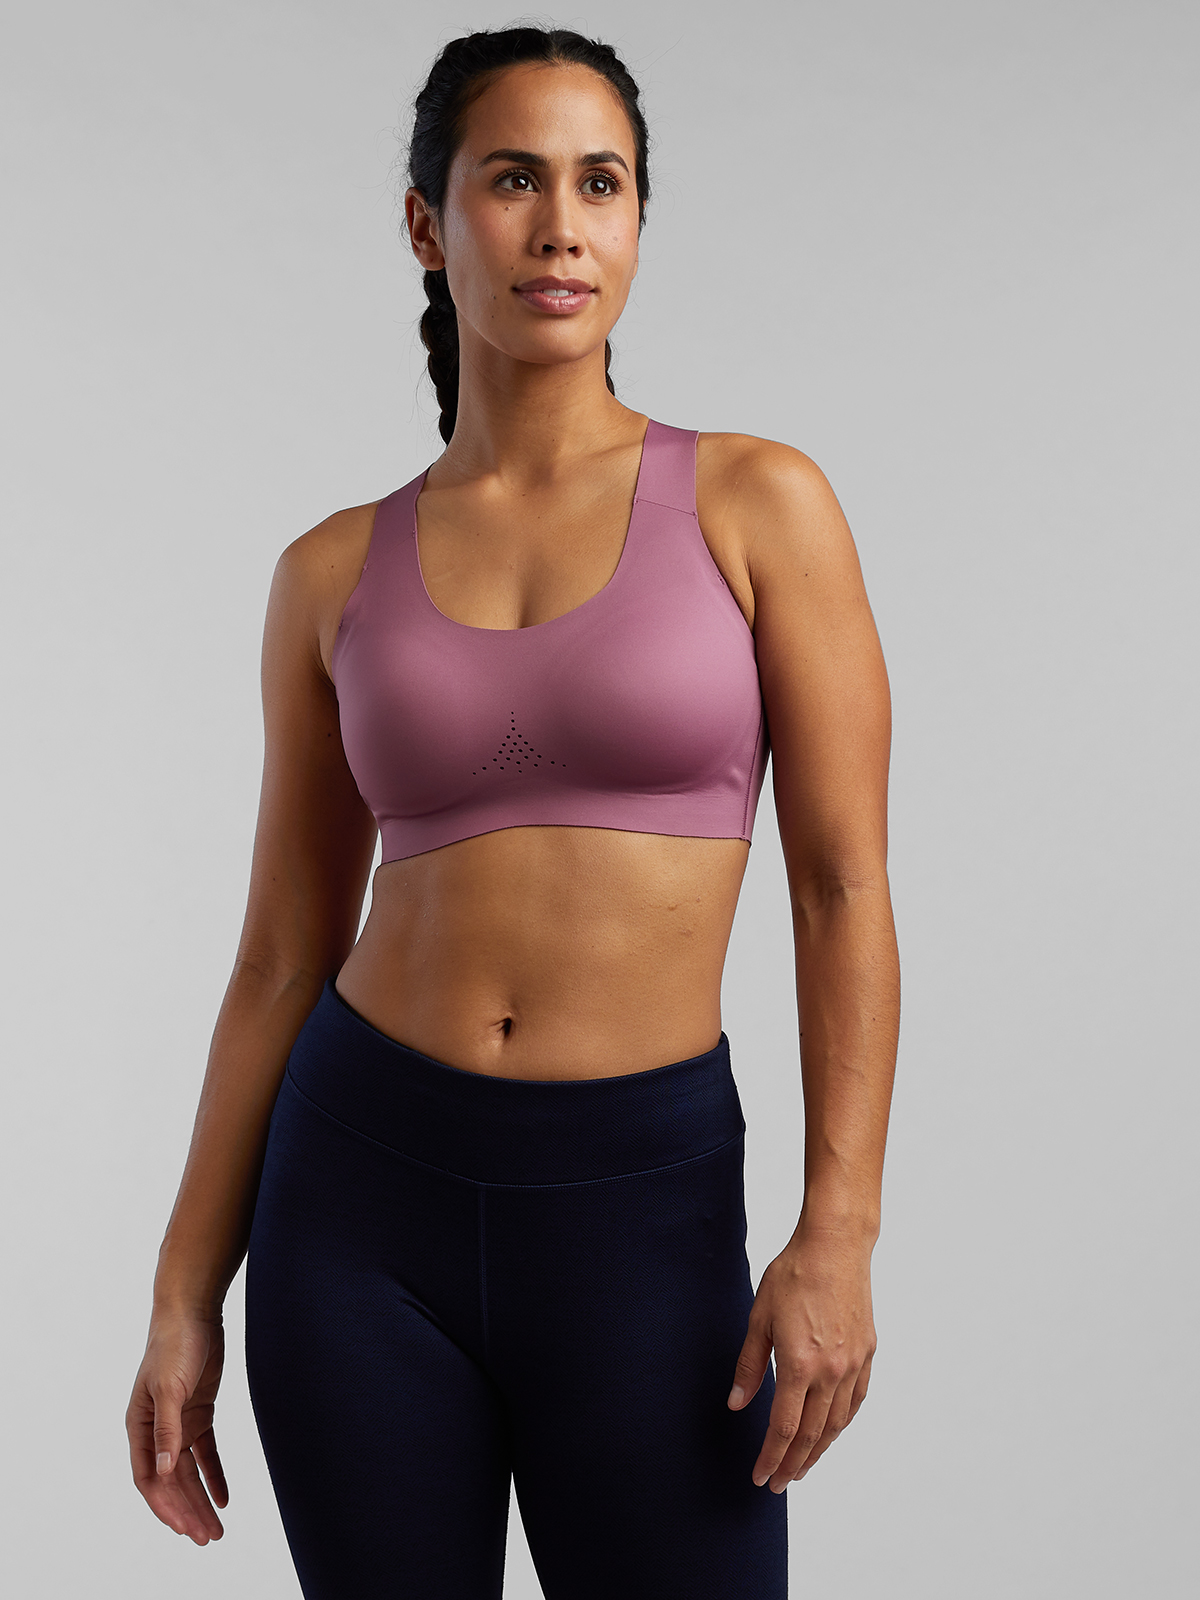 Brooks Running - Find a sports bra your run, and wallet, truly